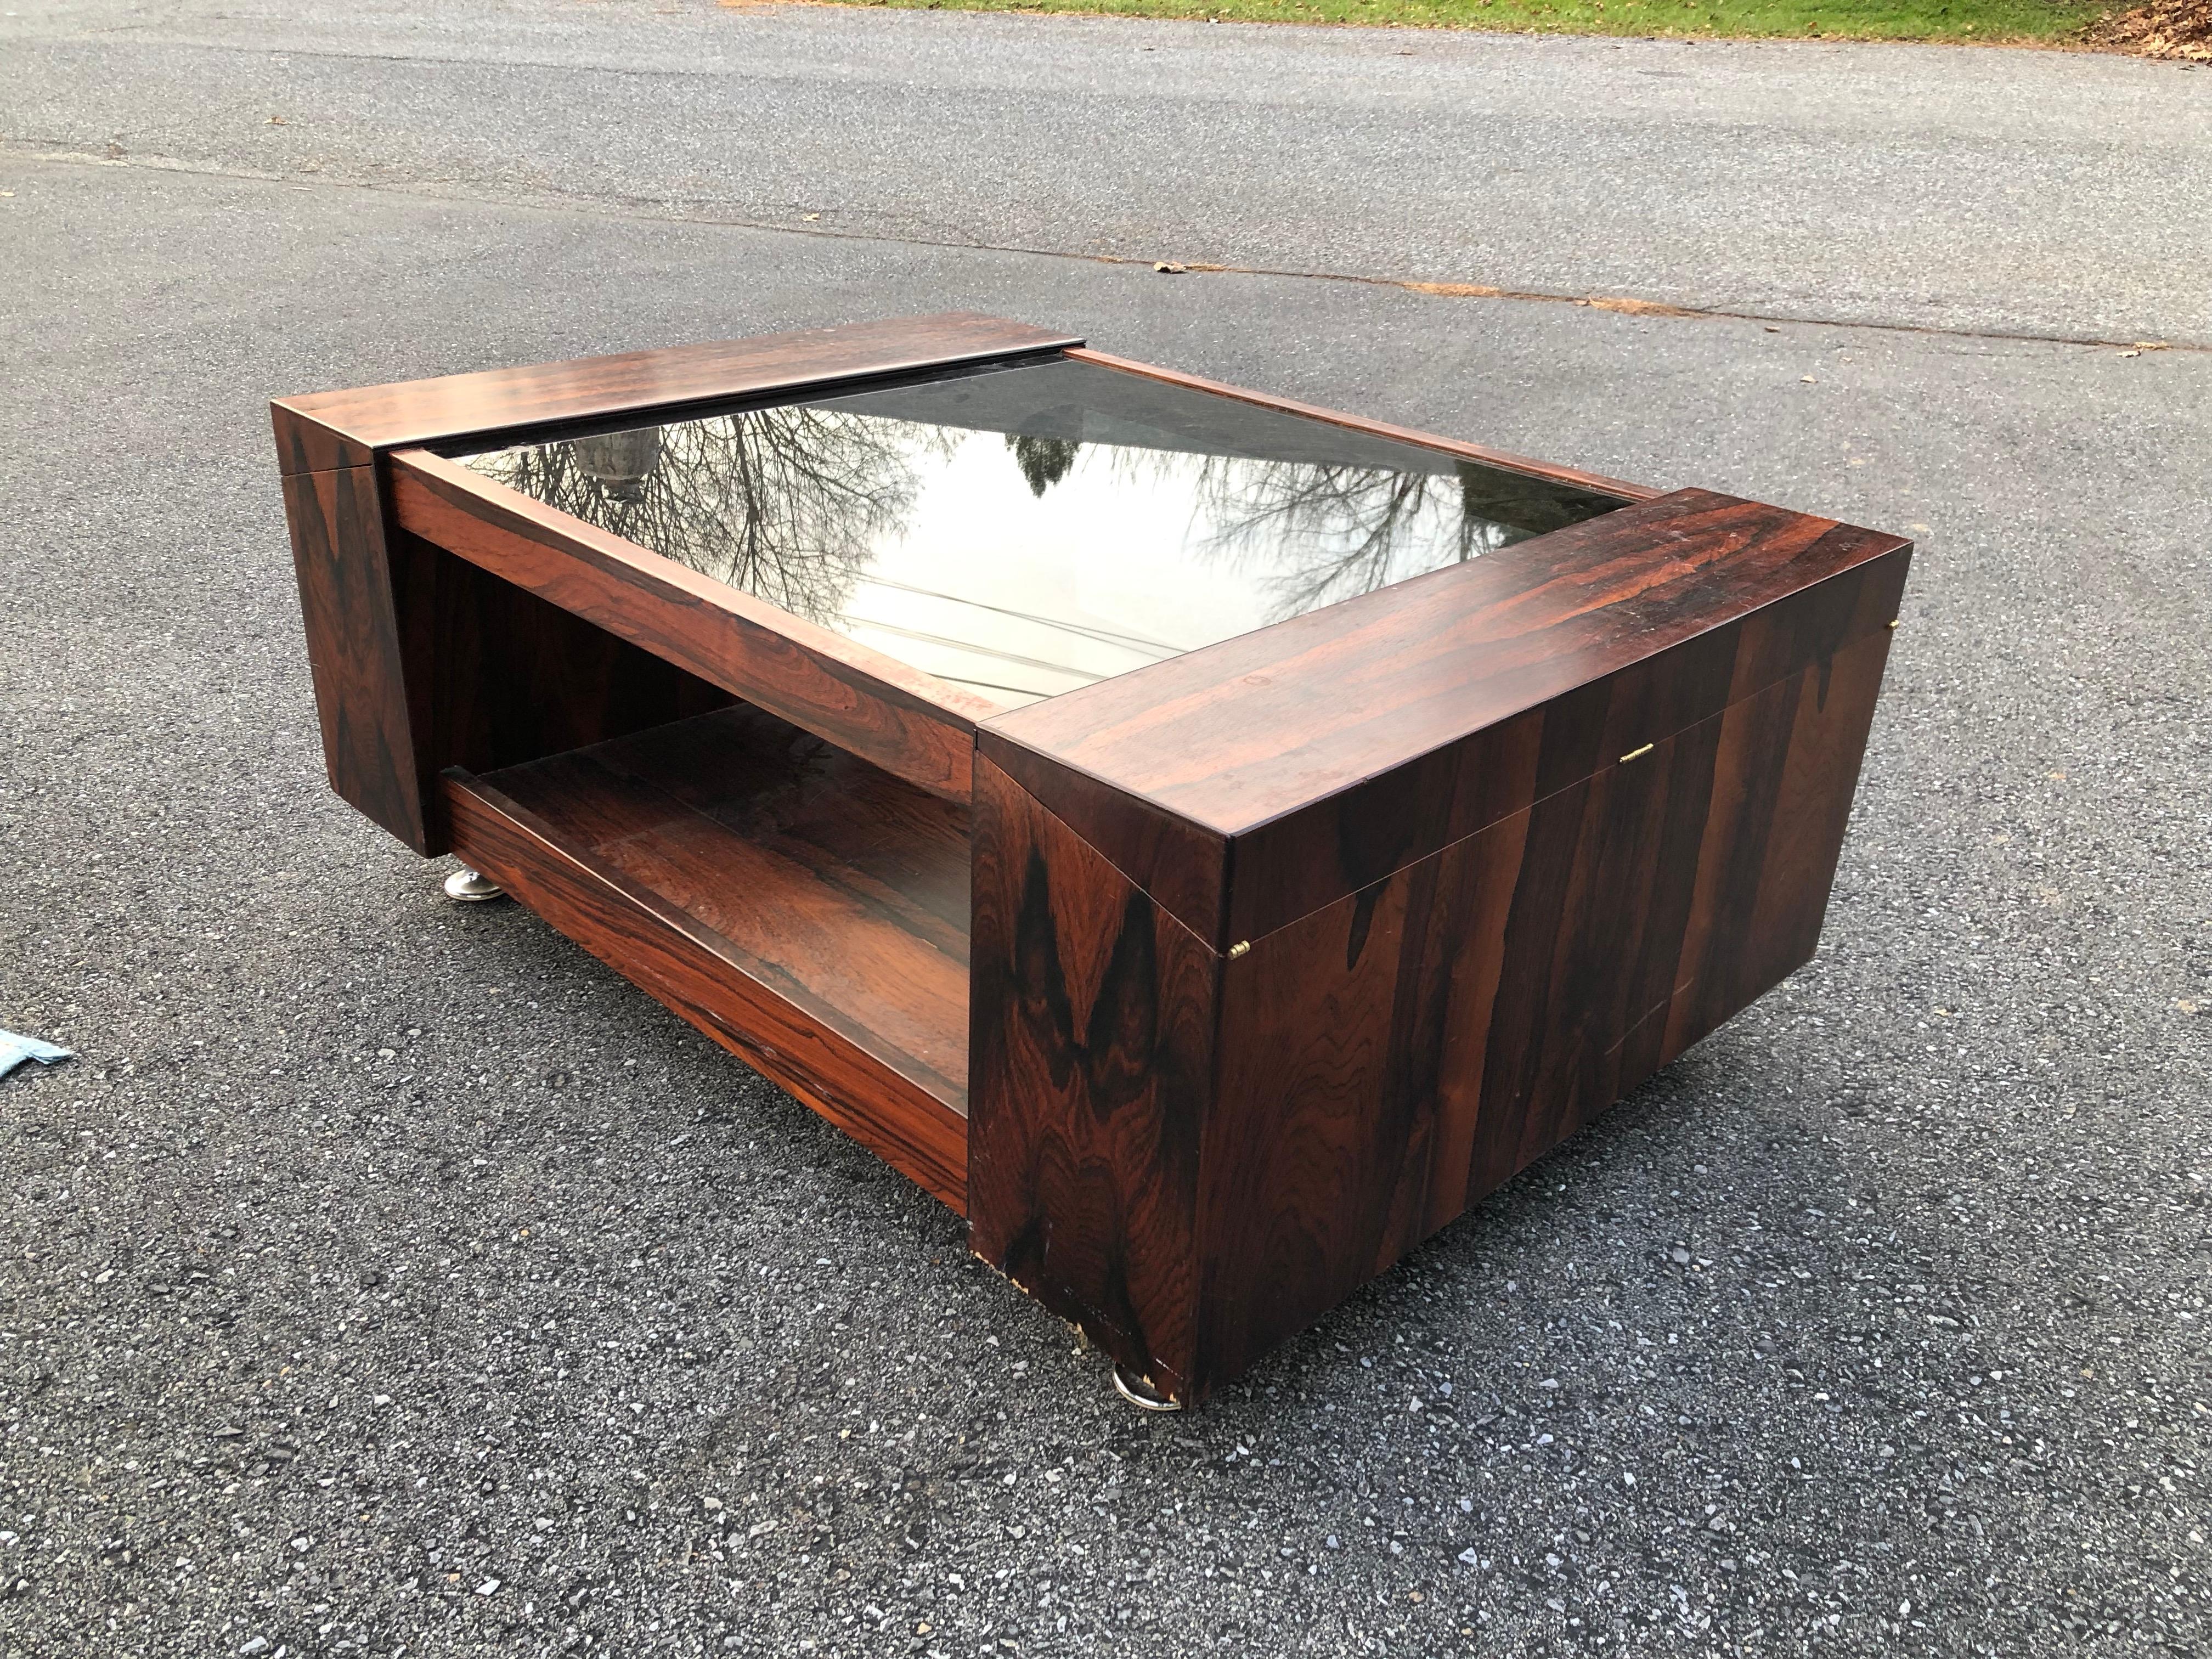 Brazilian rosewood coffee table by Leif Alring
With hidden storage and smoked glass top
Design